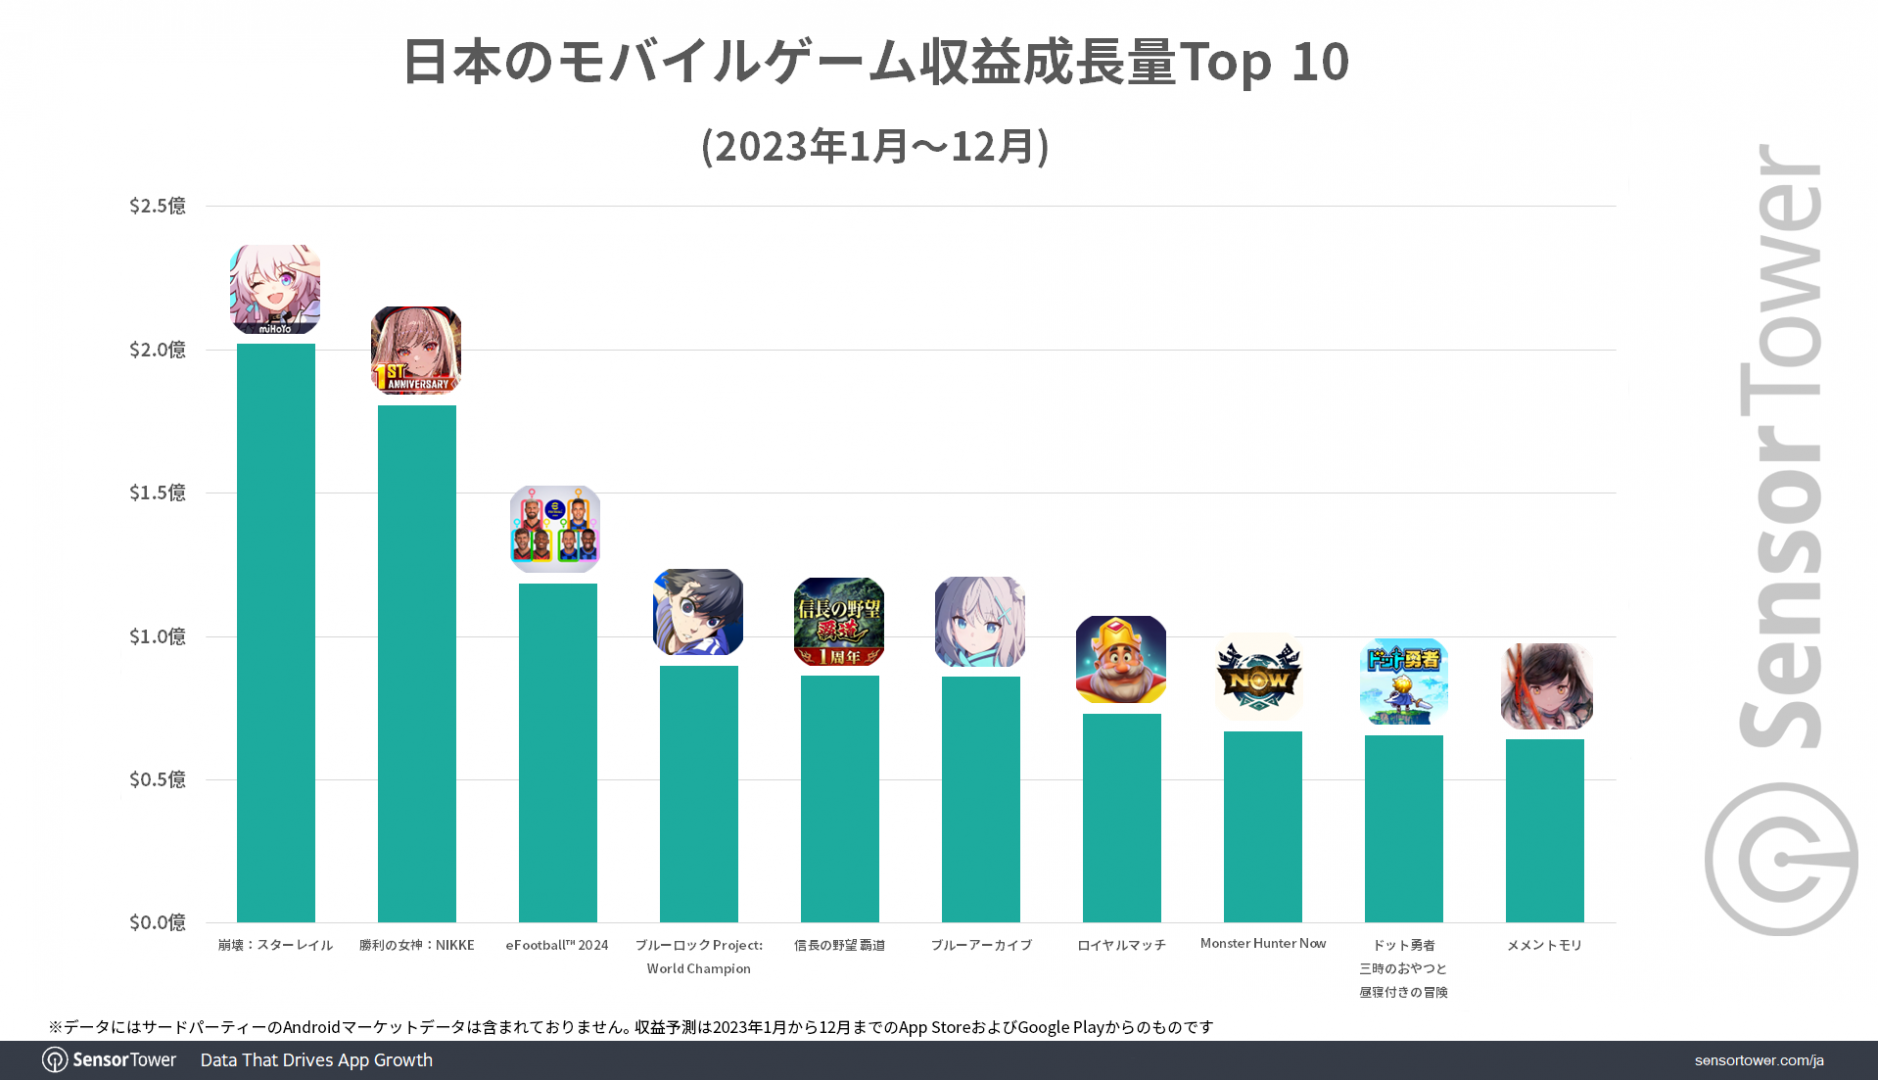 Top 10 ranking of mobile titles by revenue growth (Sensor Tower)